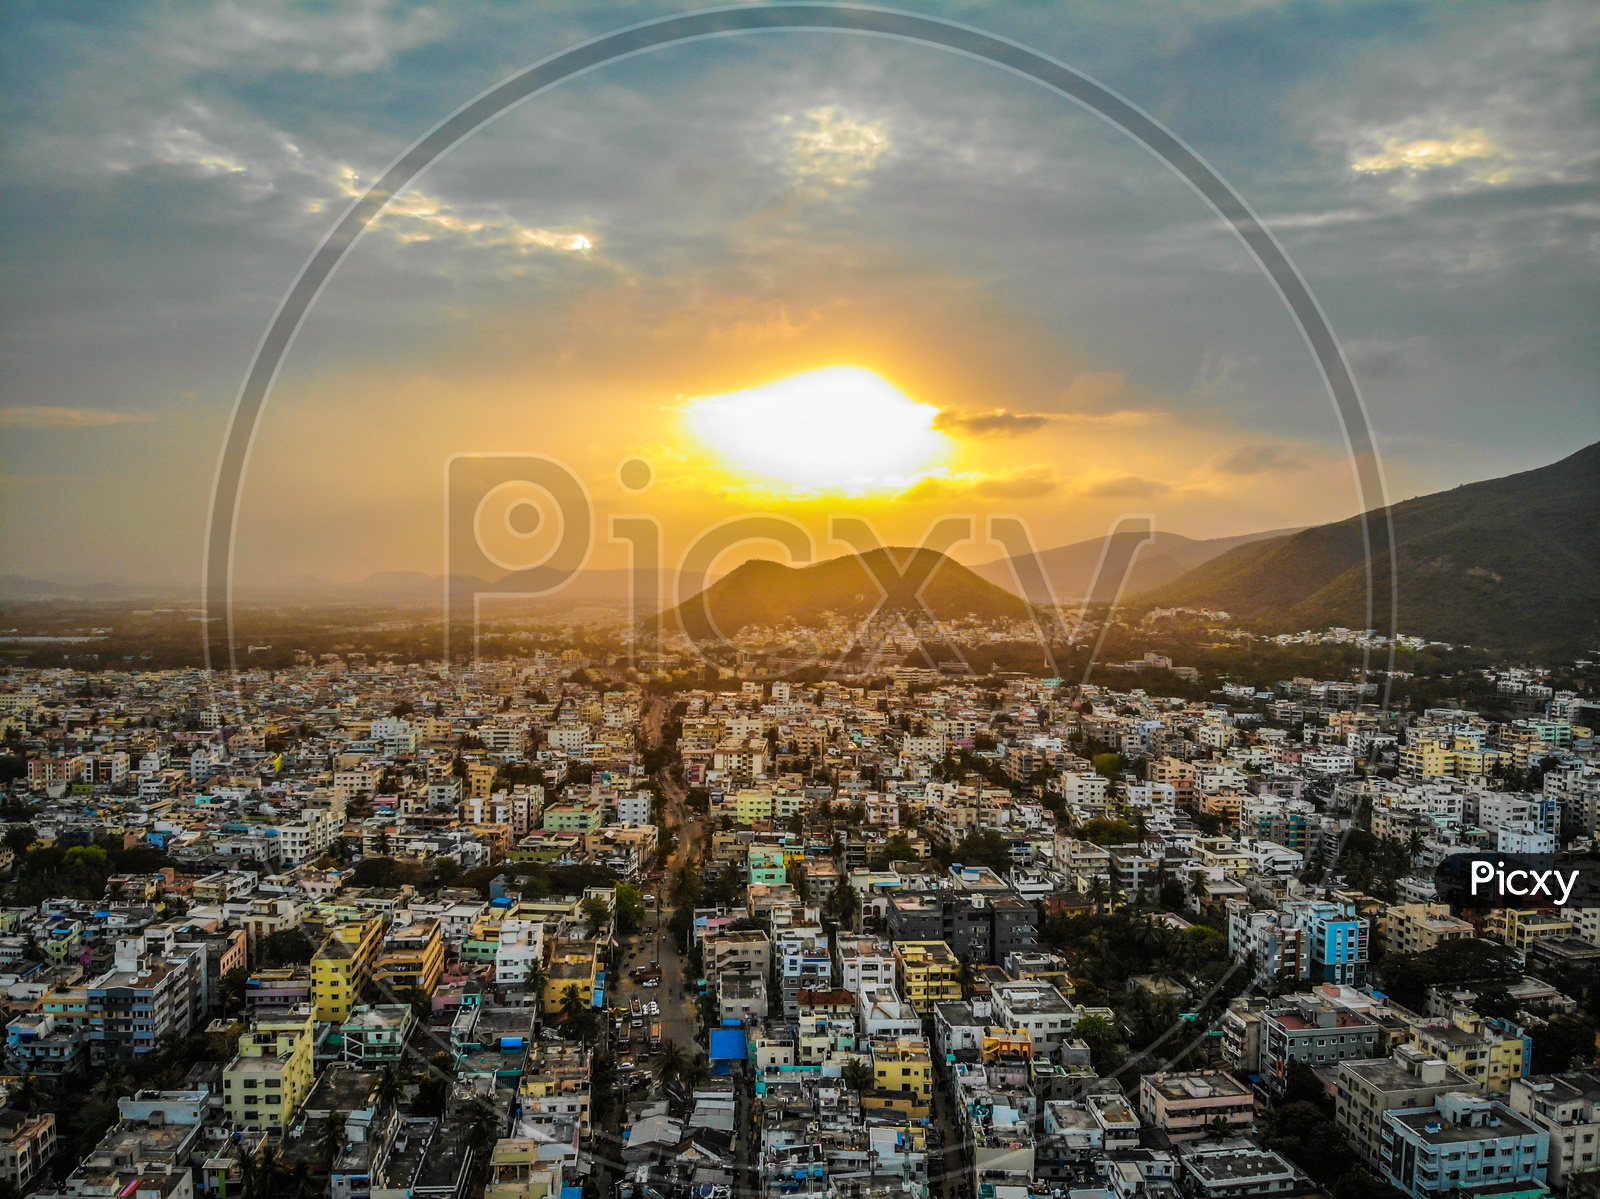 VIBRANT VIZAG CITY DURING THE GOLDEN HOUR